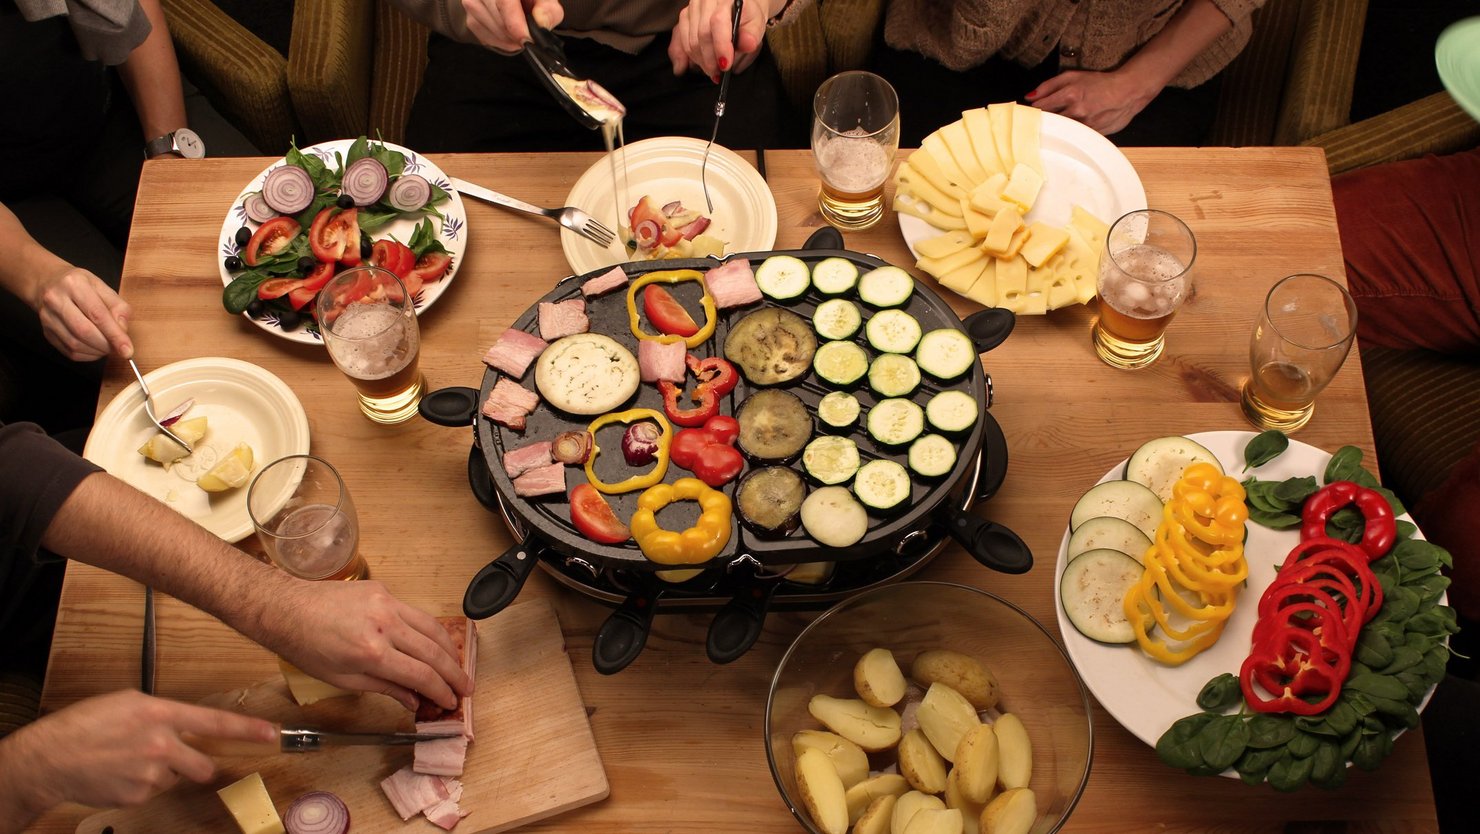 [Translate to DA (Denmark):] Table with raclette oven and dishes with potatoes, vegetables and cheese